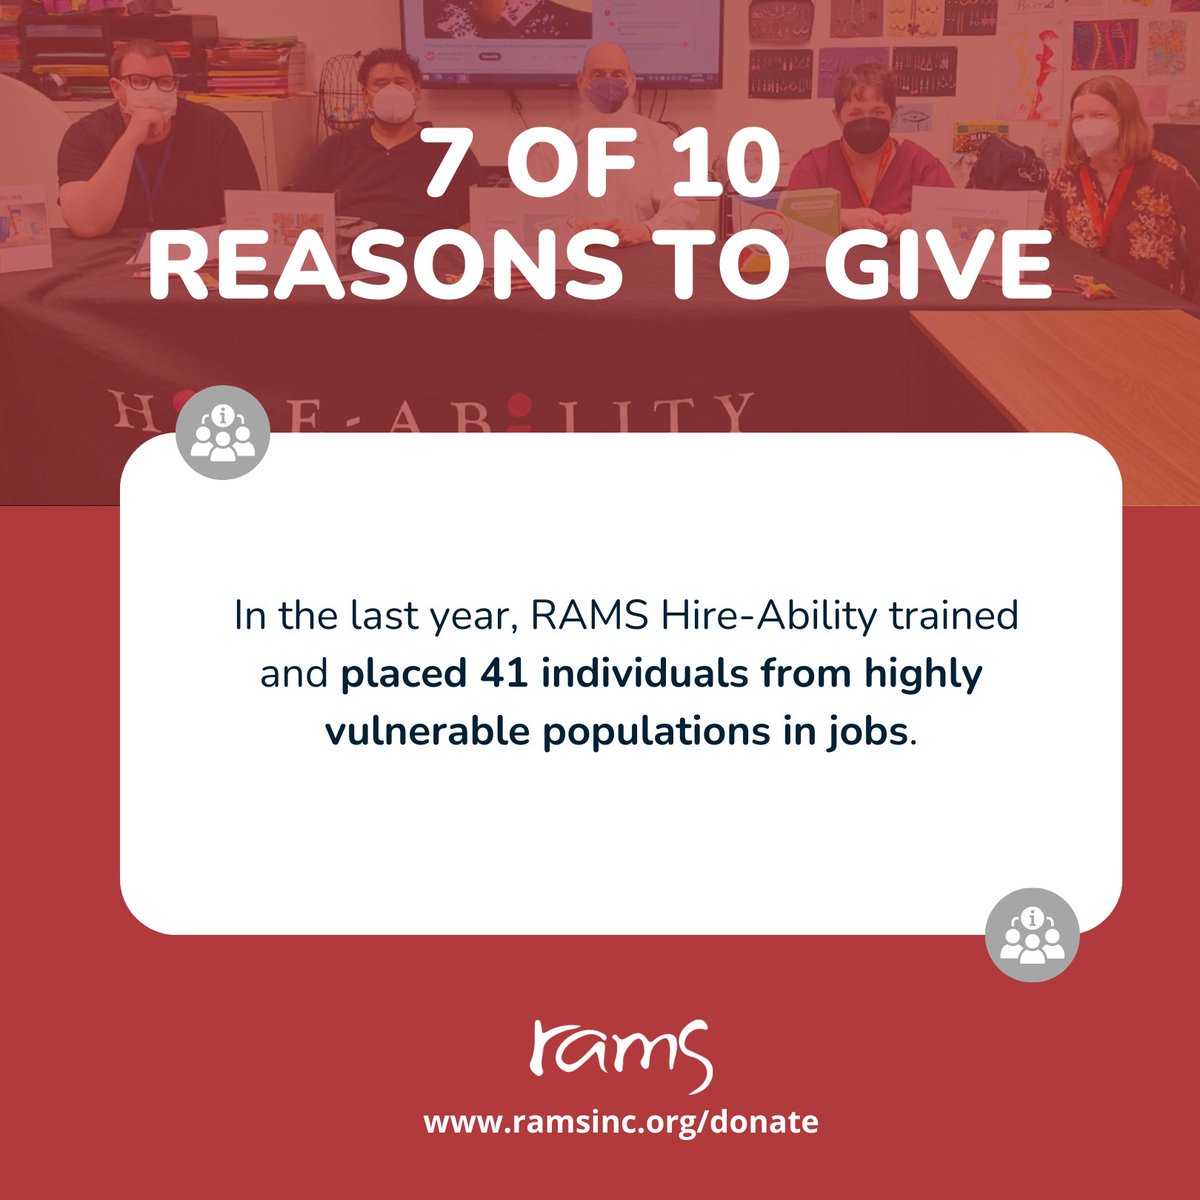 Day 7 of 10 Reasons to Give to RAMS: We recognize the importance of vocational training & job placement to the overall wellness of local communities. Help fund the financial stability of the SF communities in most need: ramsinc.org/donate